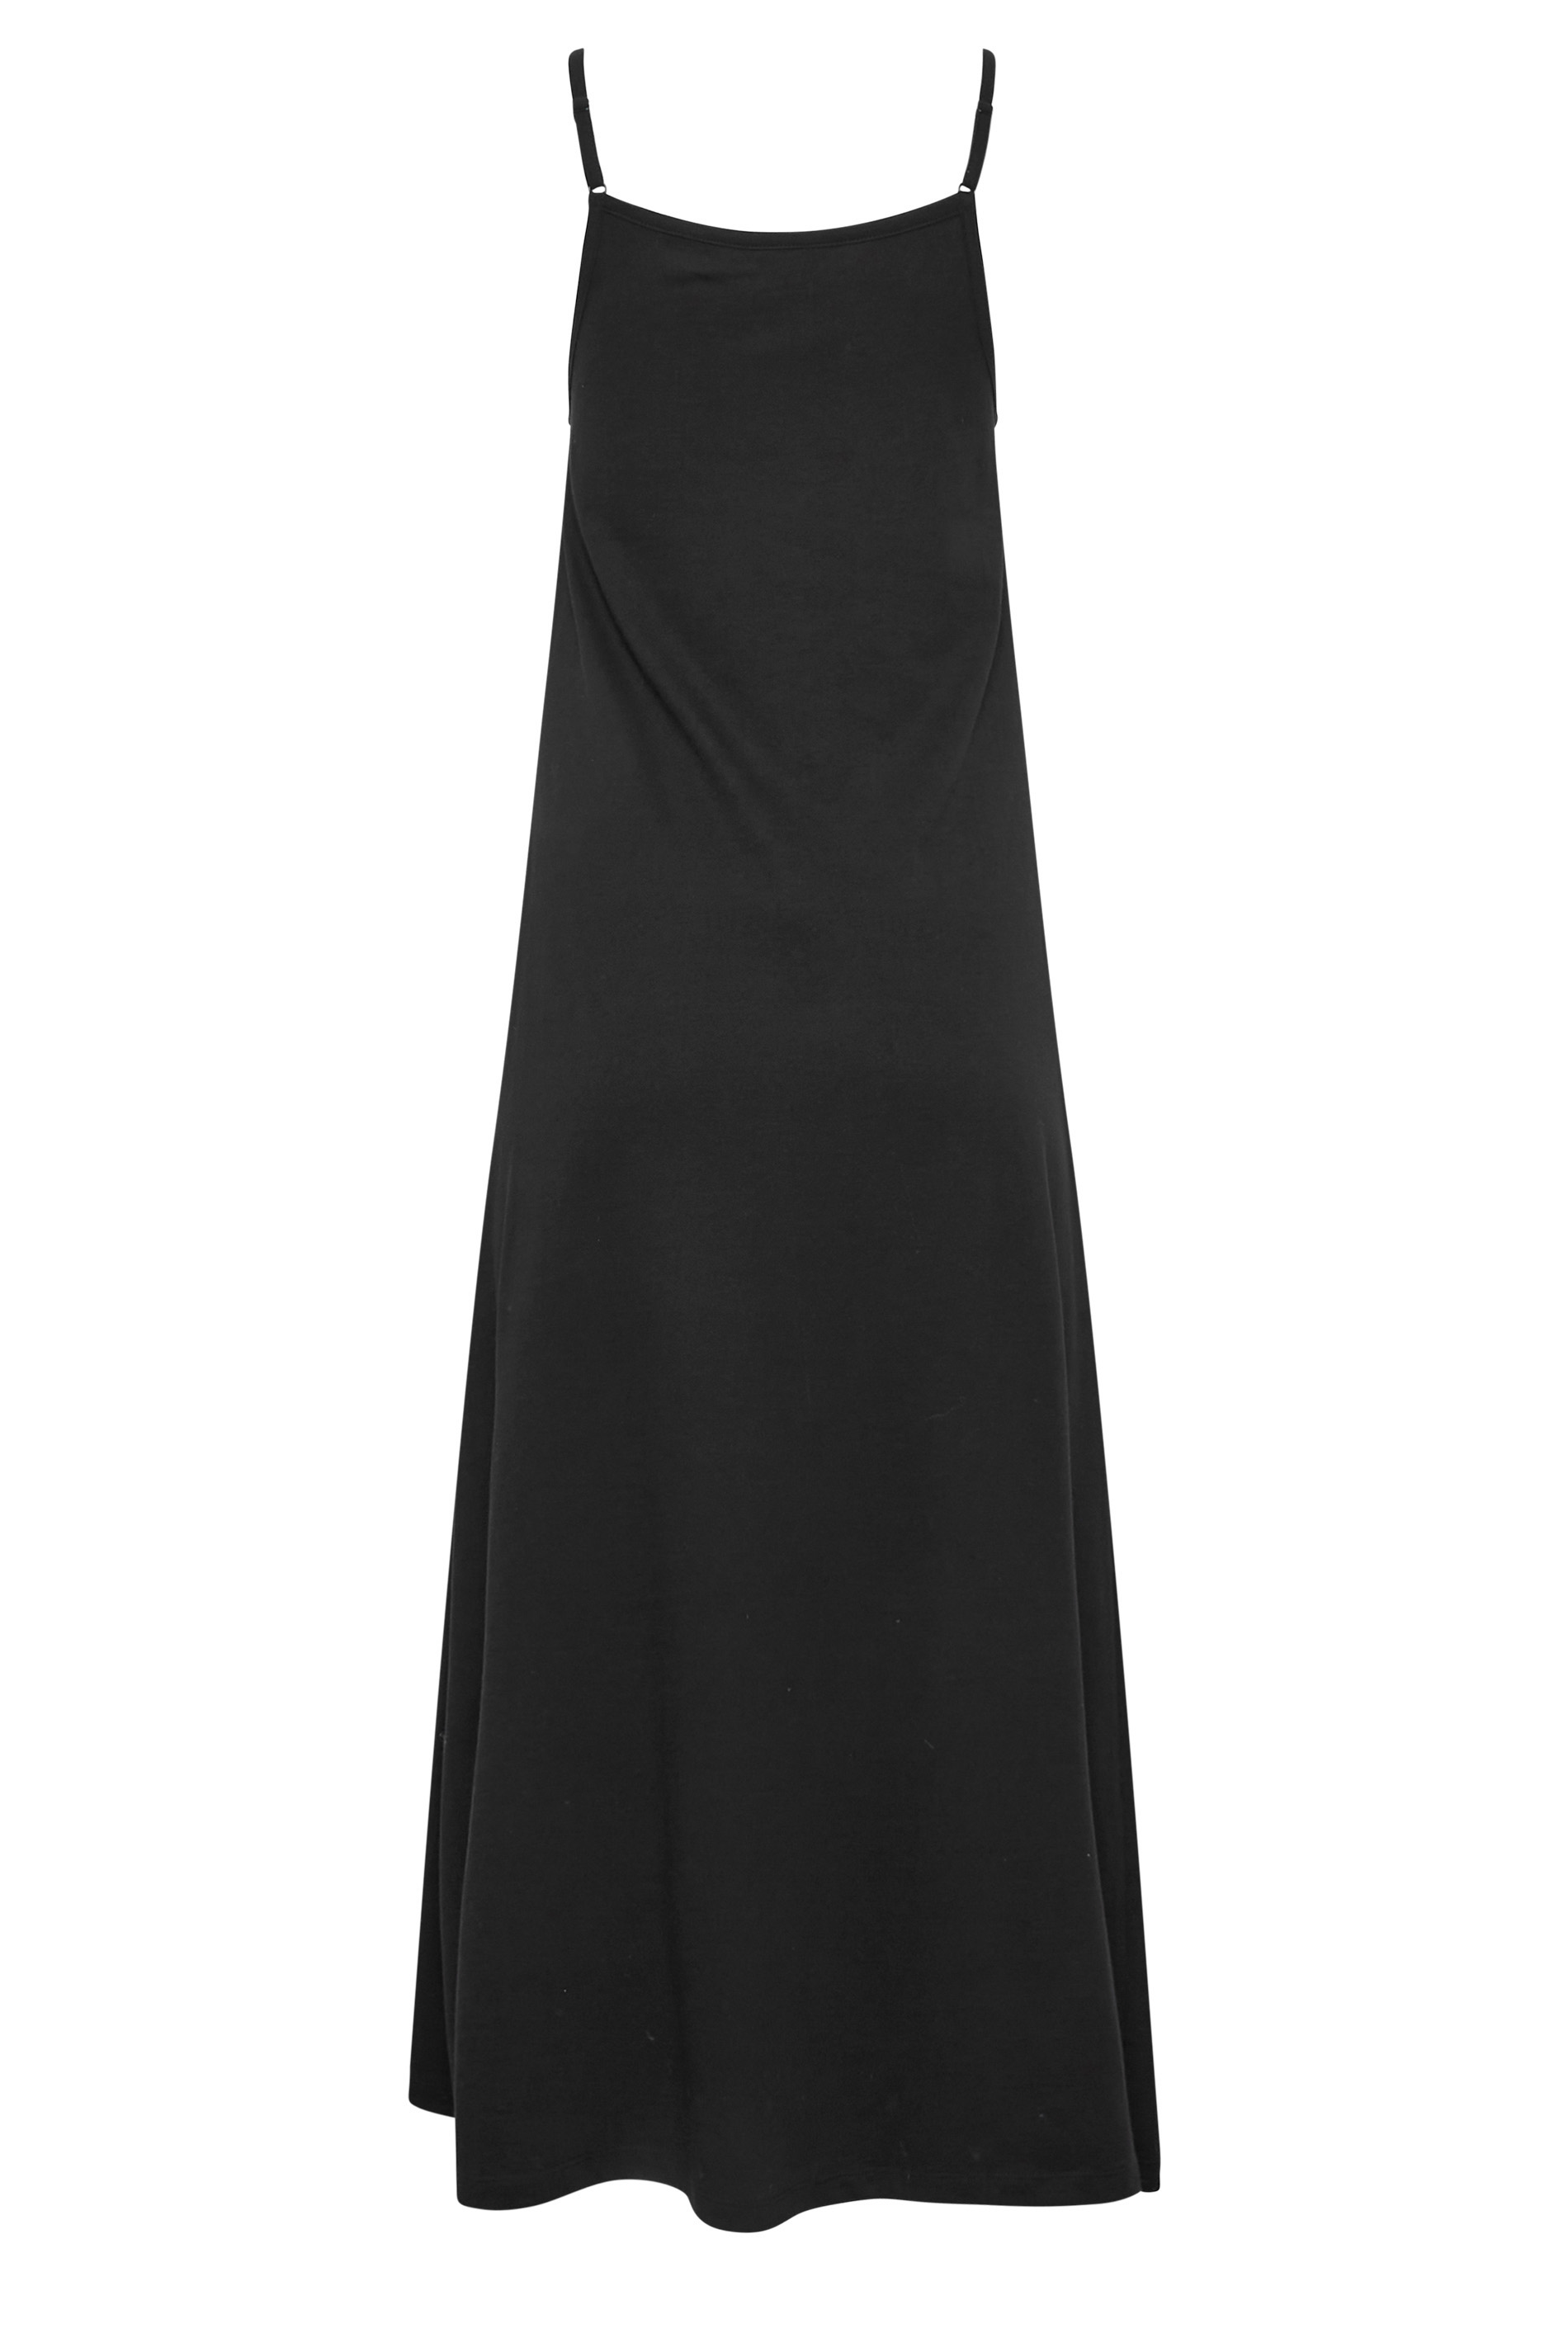 YOURS PETITE Curve Black Strappy Maxi Slip Dress | Yours Clothing